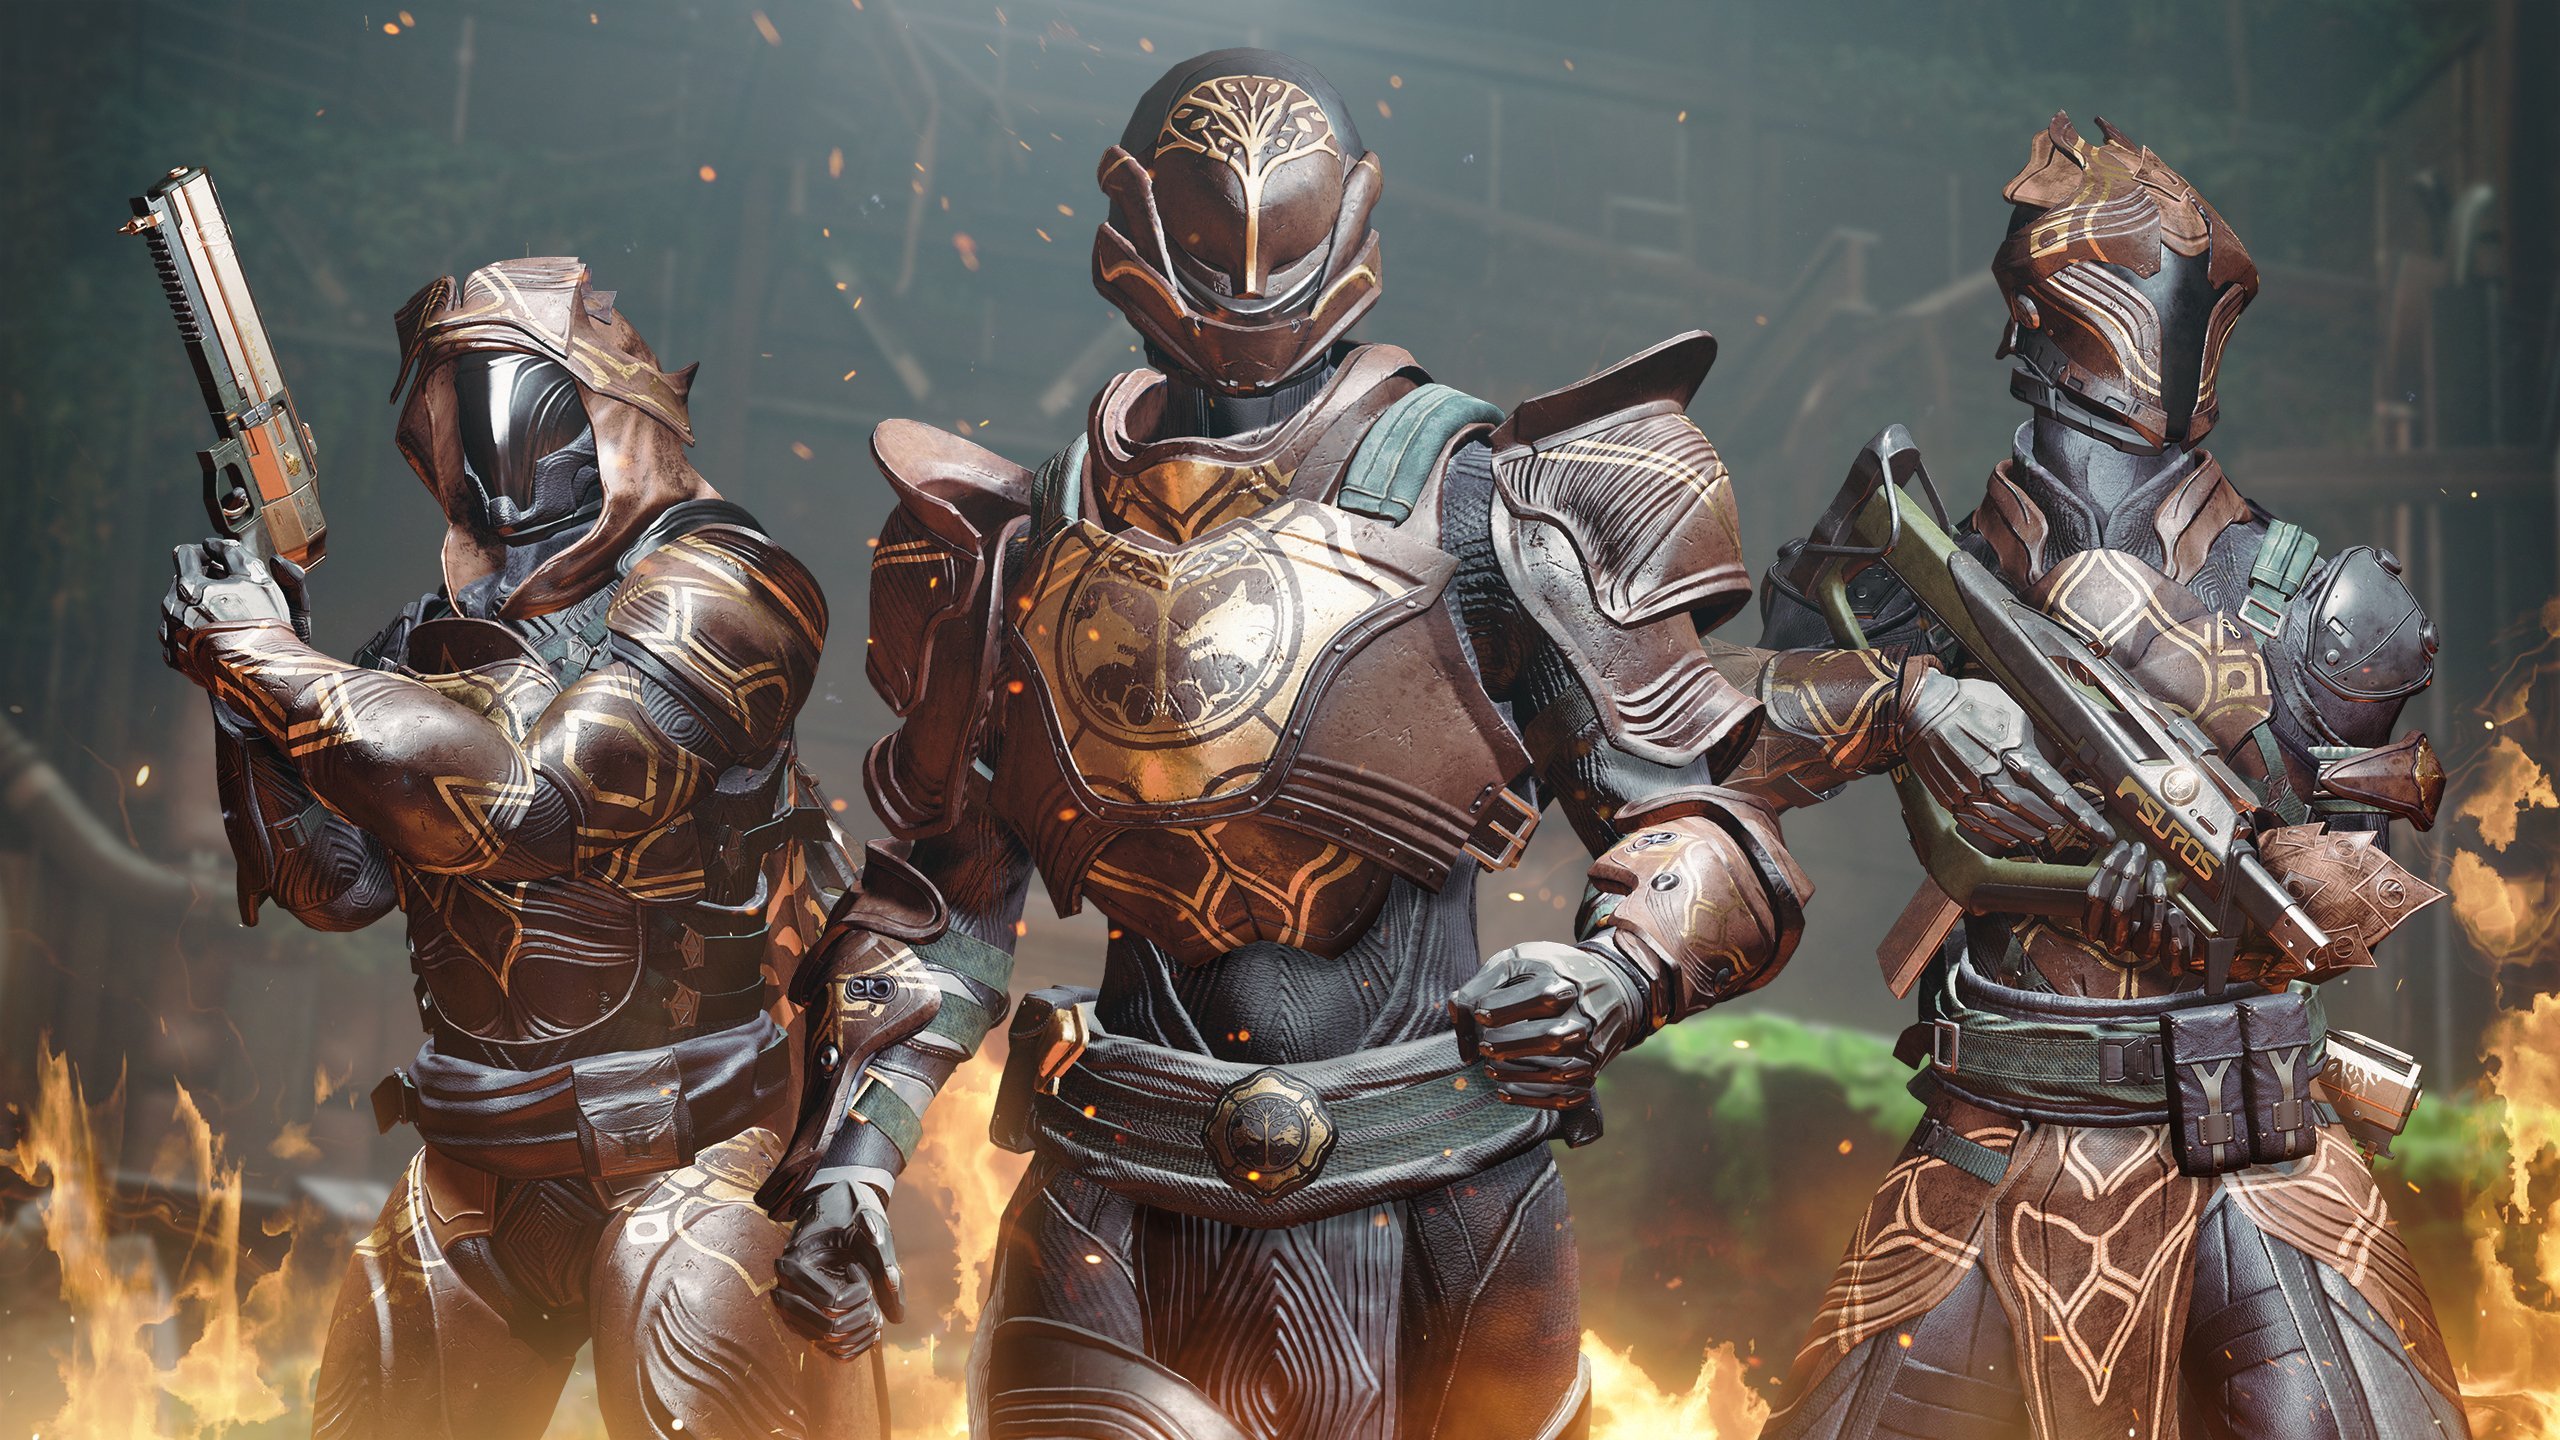 Destiny 2 final Iron Banner of Season of the Forge is wrapping up. Make Lord Saladin proud